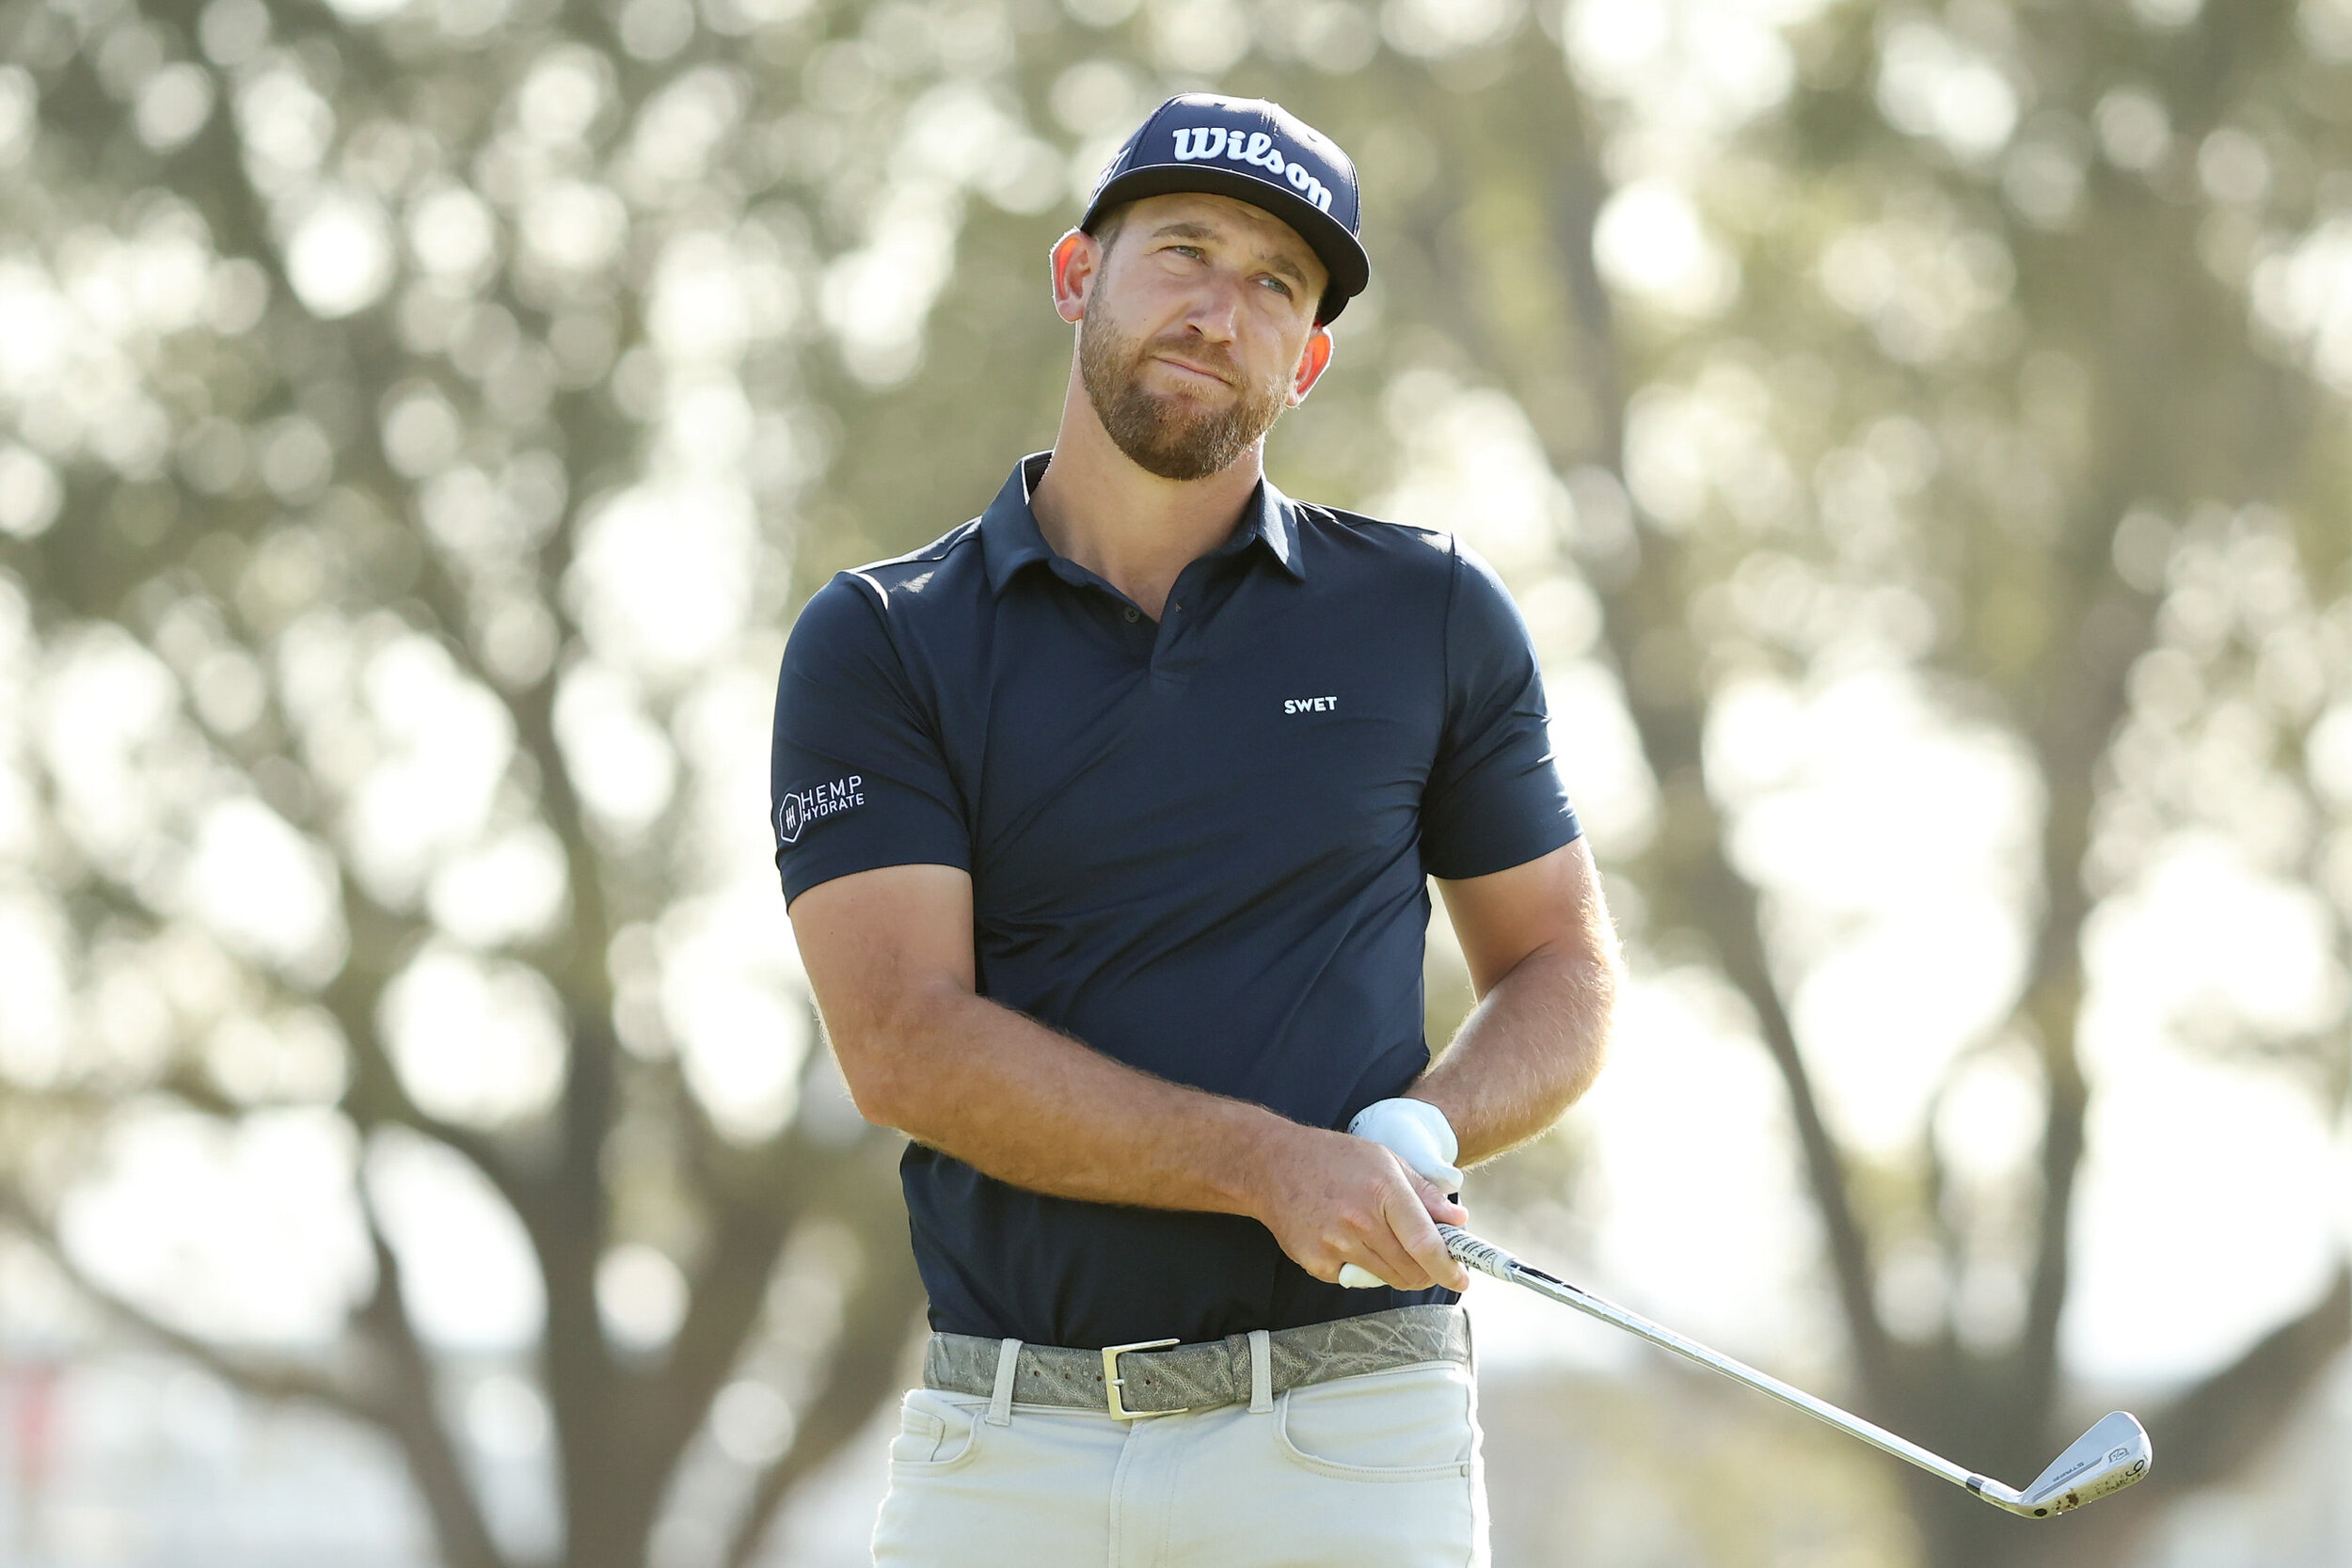  PALM BEACH GARDENS, FLORIDA - MARCH 18: Kevin Chappell of the United States plays his shot from the fifth tee during the first round of The Honda Classic at PGA National Champion course on March 18, 2021 in Palm Beach Gardens, Florida. (Photo by Cli